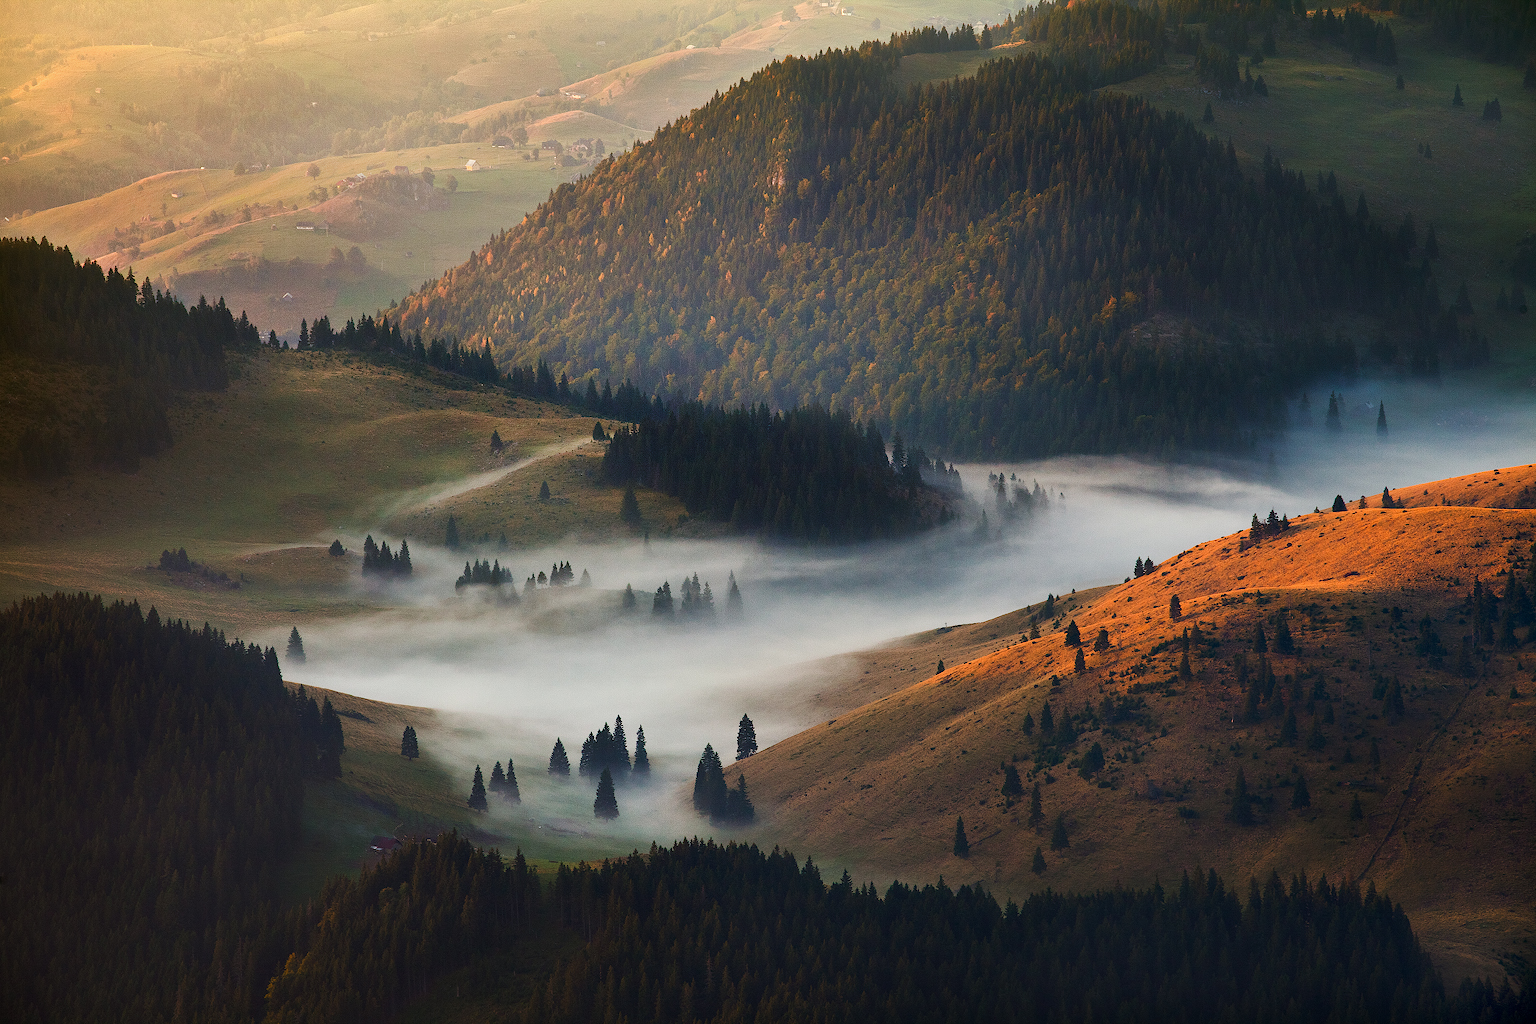 General 1536x1024 nature landscape mountains valley mist trees forest hills pine trees Romania fall